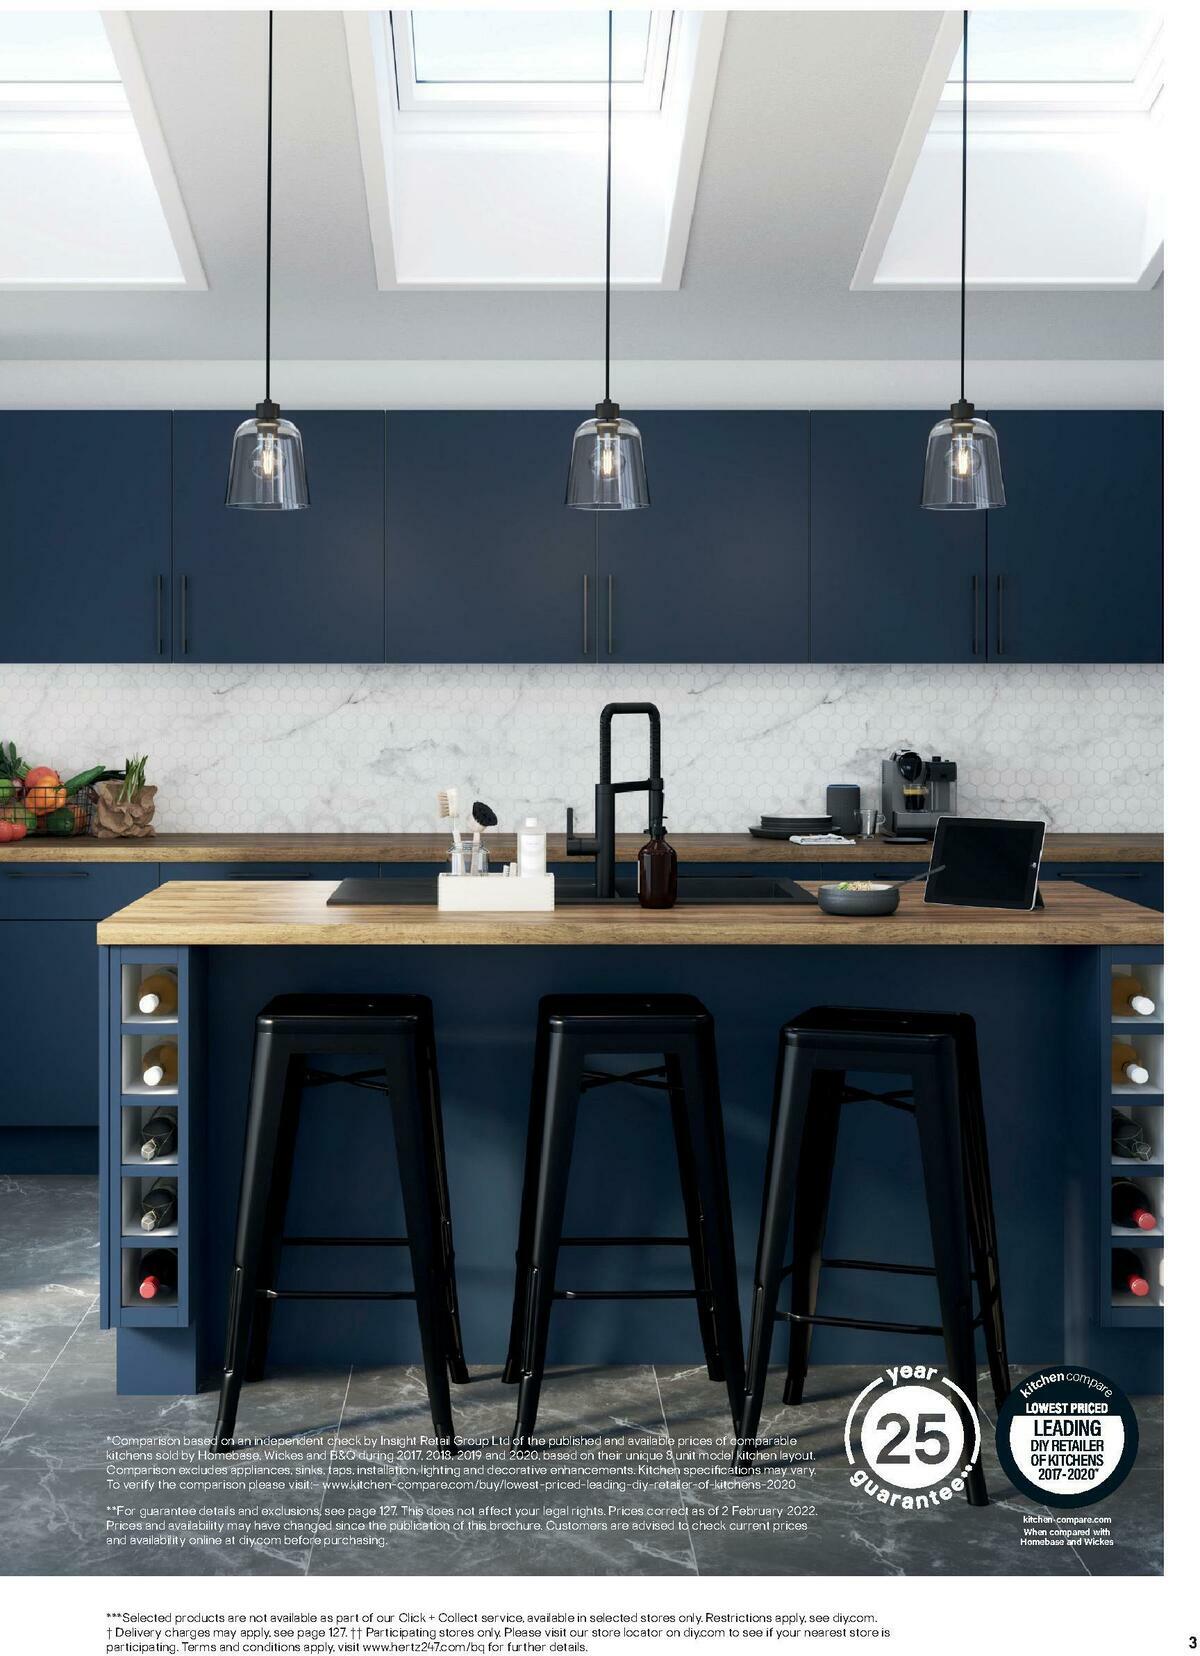 B&Q Kitchens Inspiration Offers from 1 March